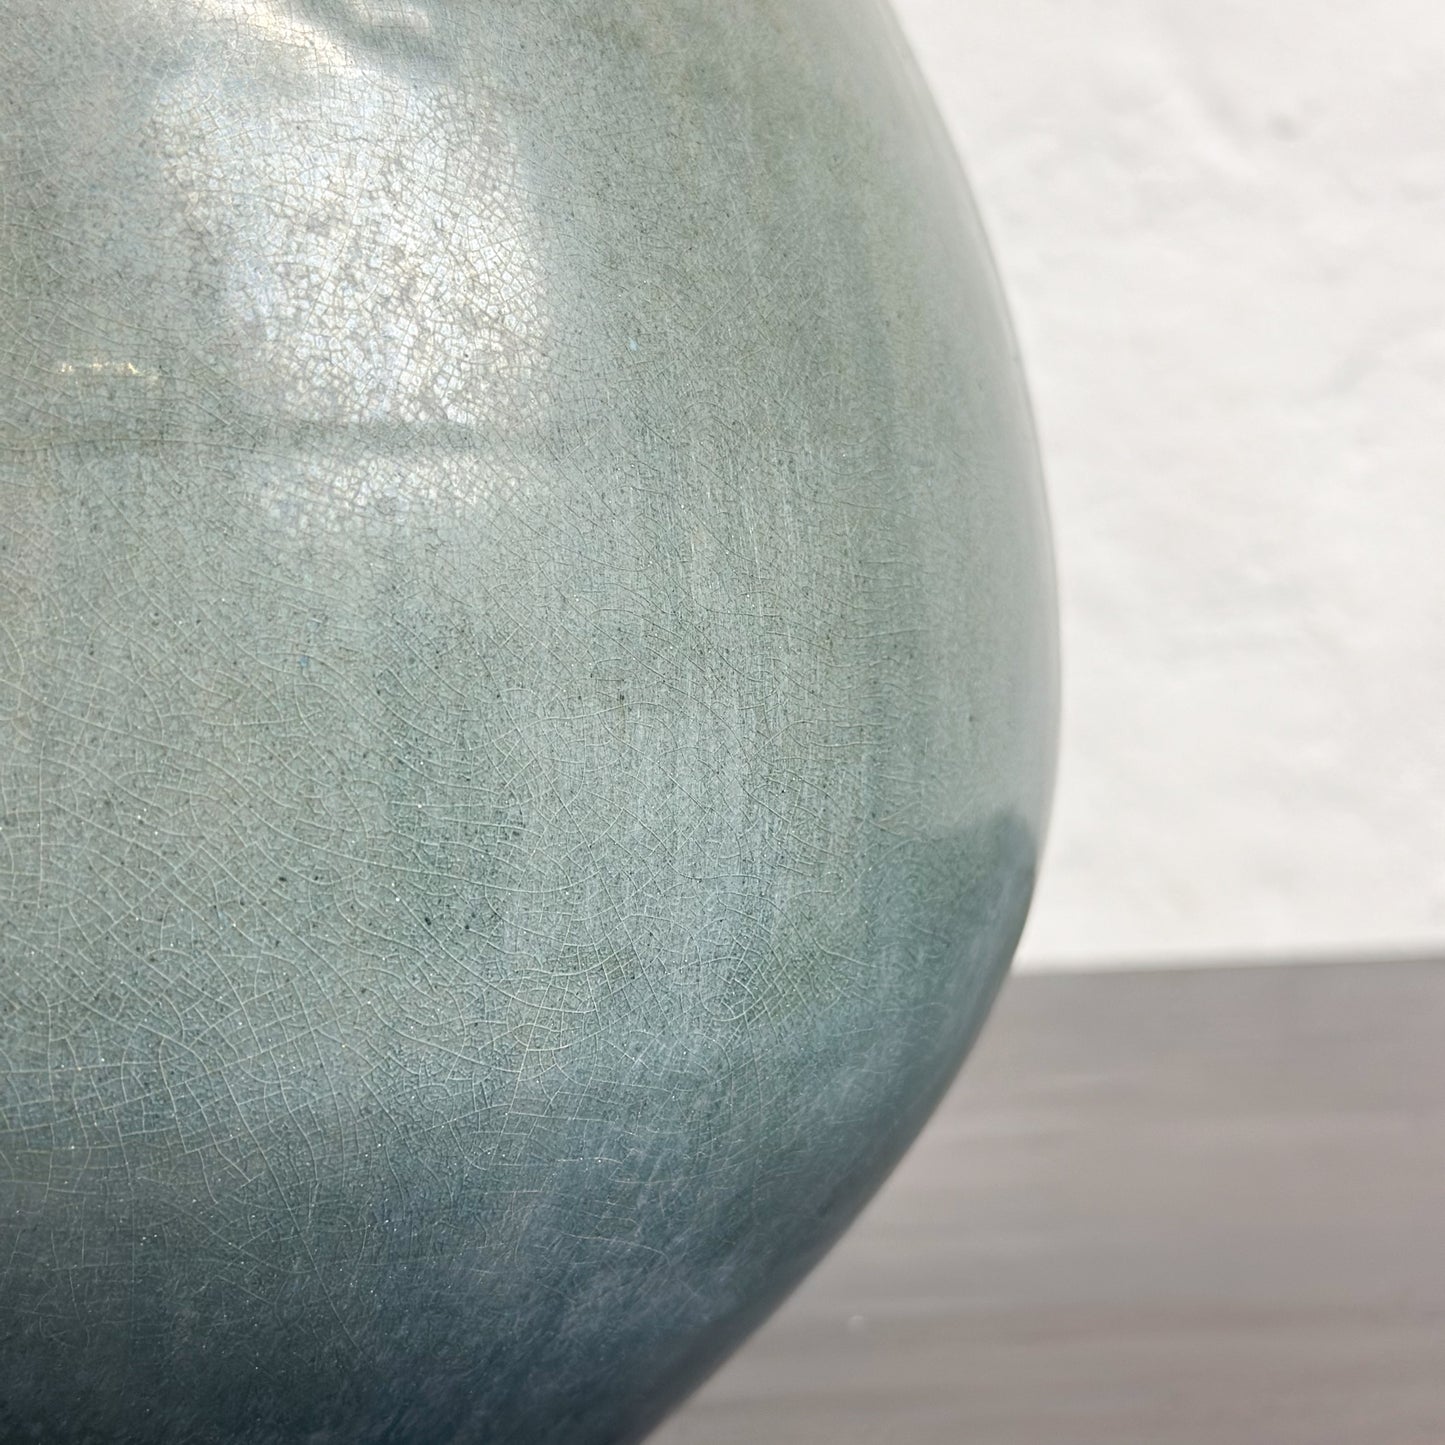 Pear Shaped Glazed Pot with Handles